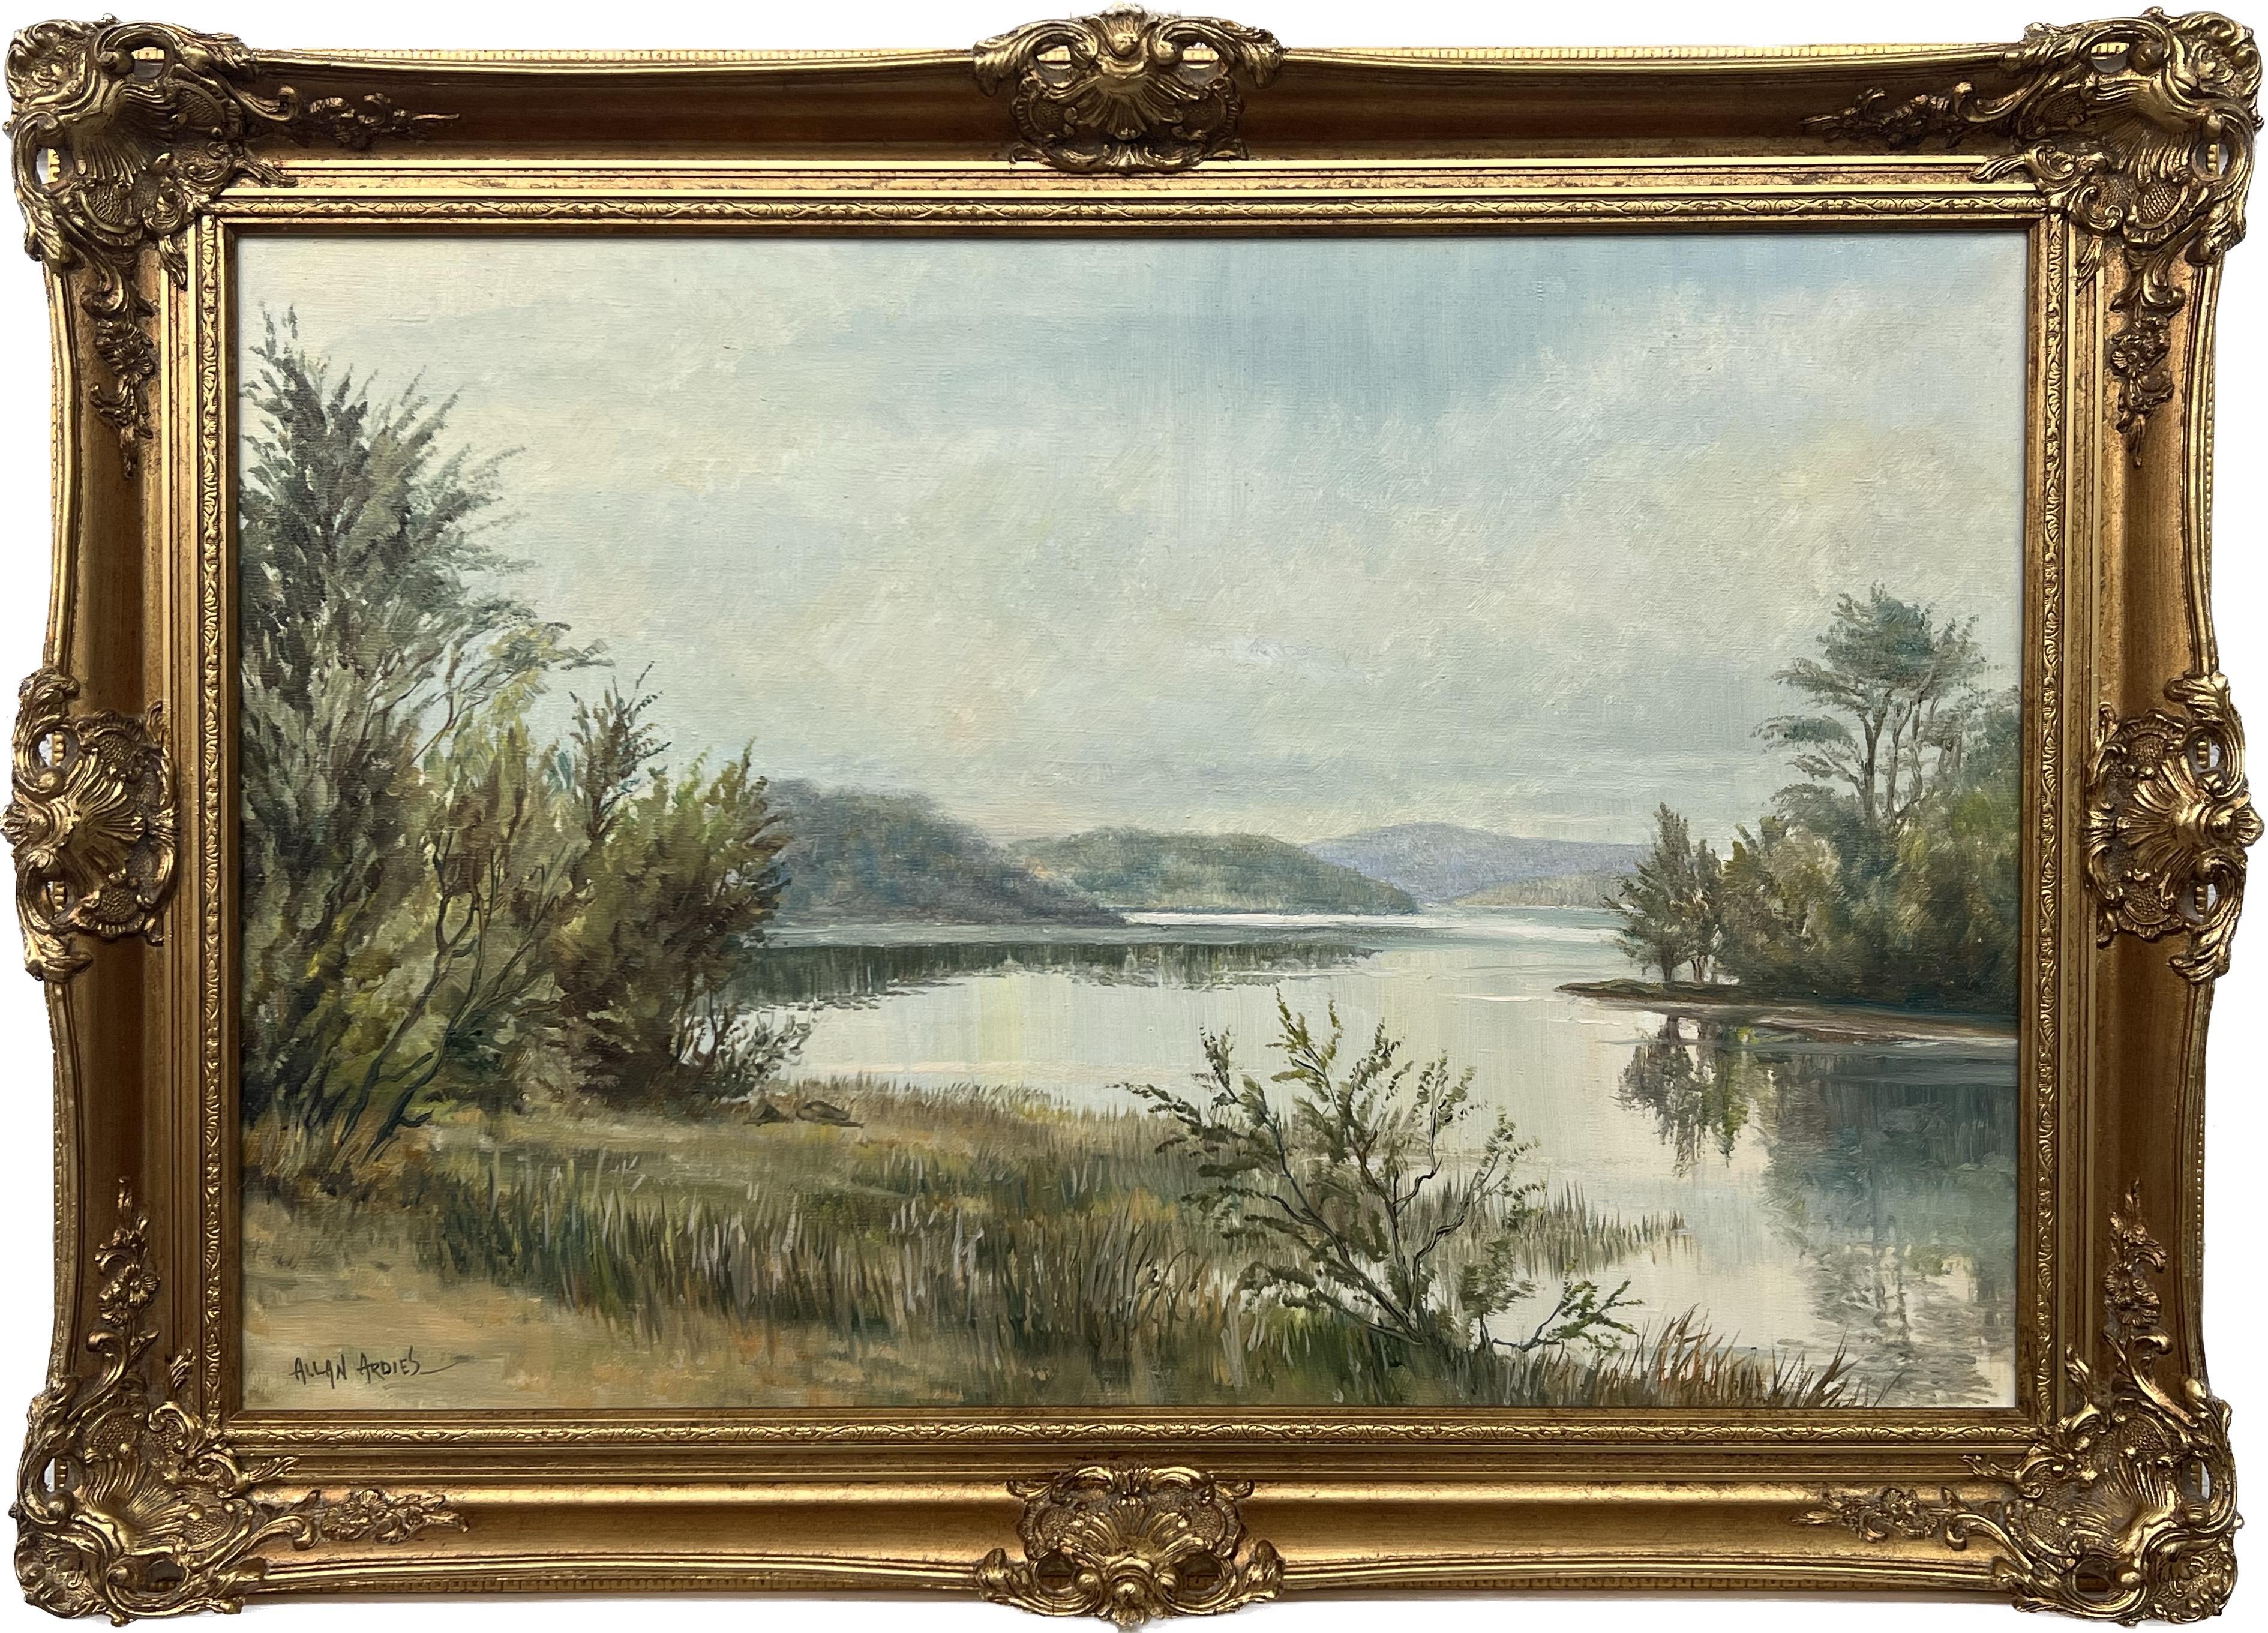 Oil Painting of a Tree-Lined River Lake Landscape in the Irish Countryside 